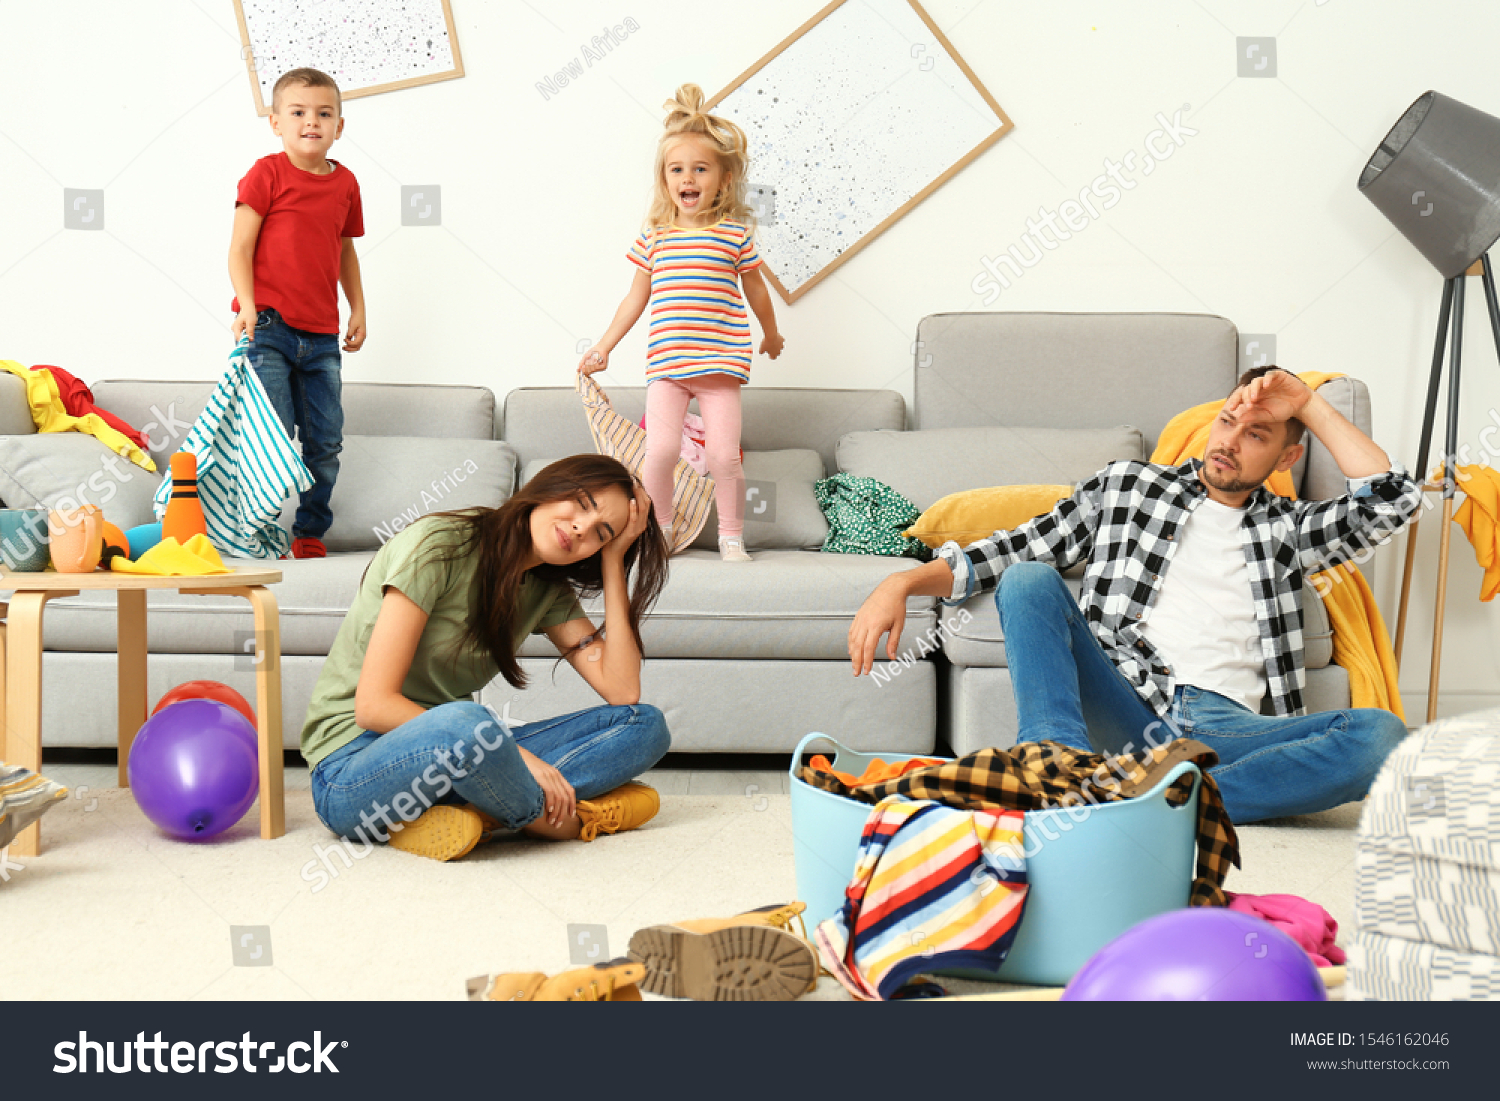 Frustrated parents and their mischievous children in messy room #1546162046